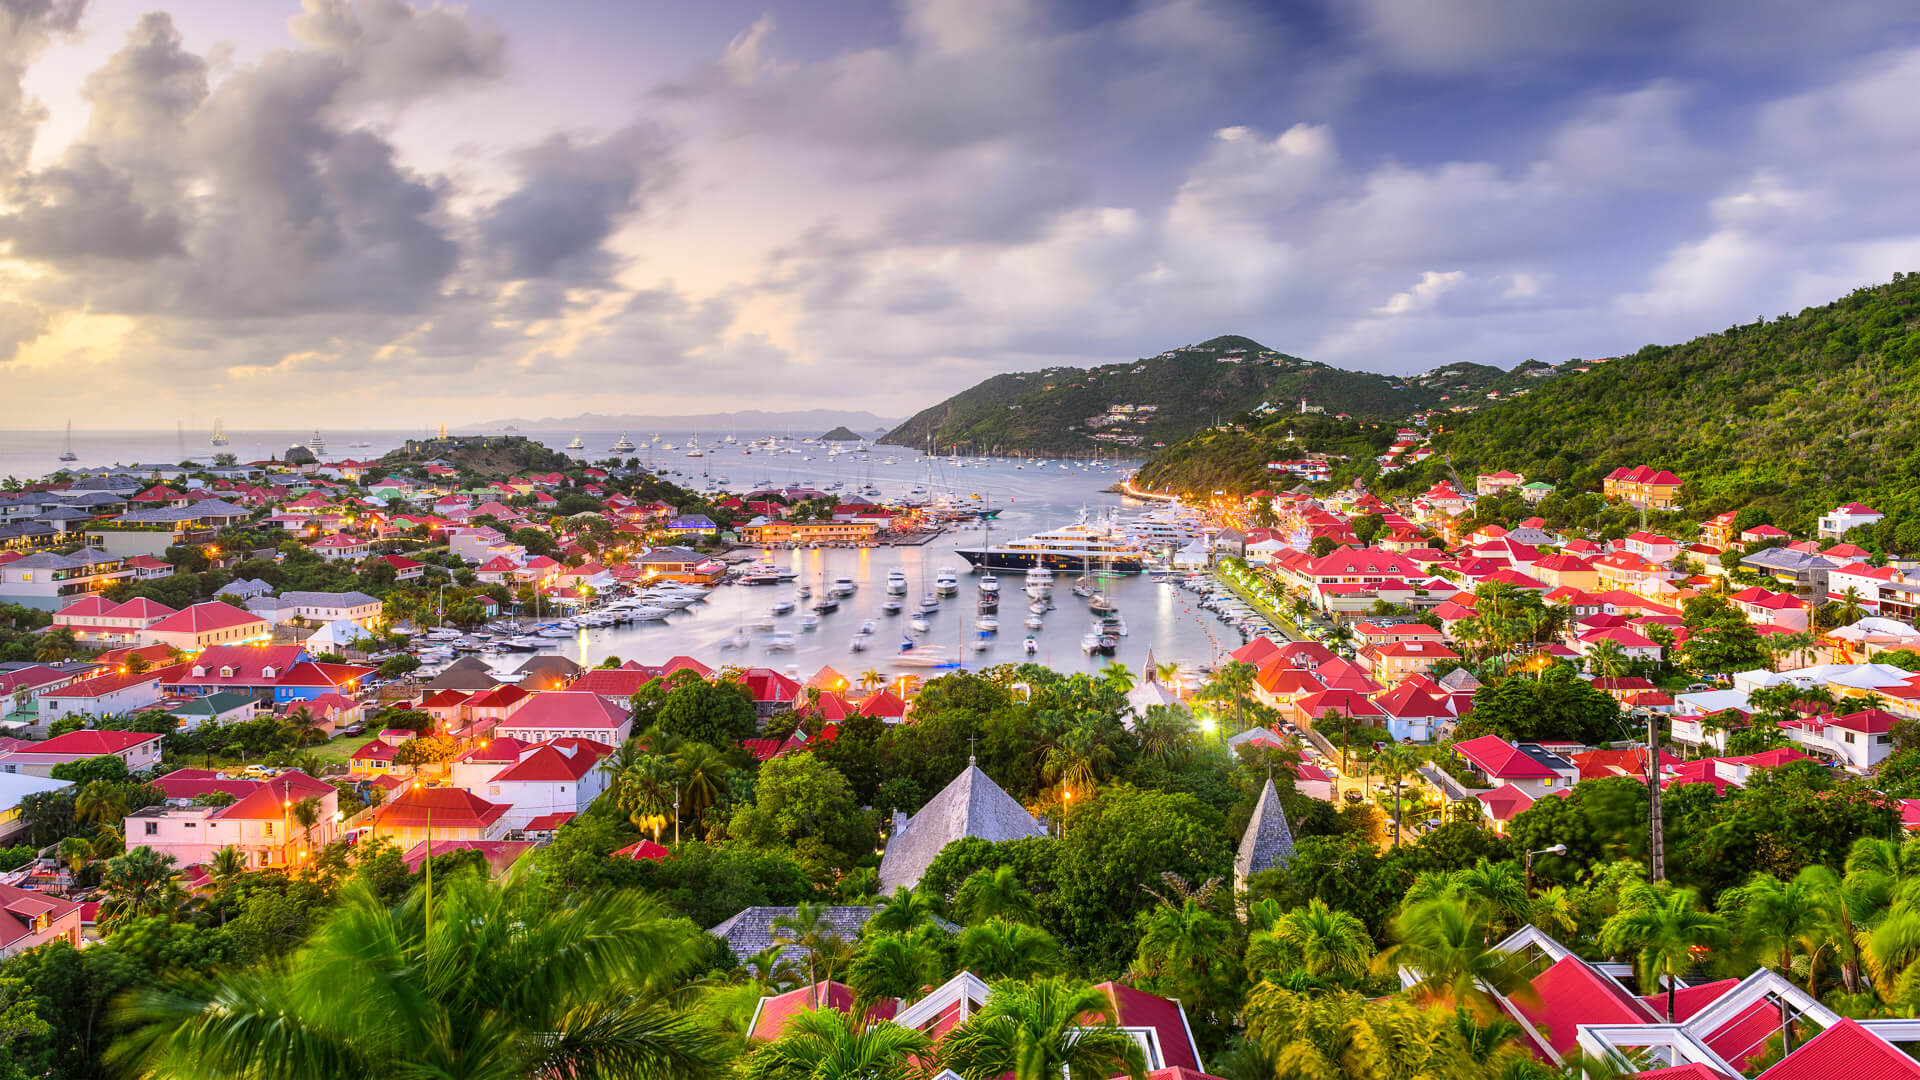 The Island of Billionaires: Things to do in St. Barts